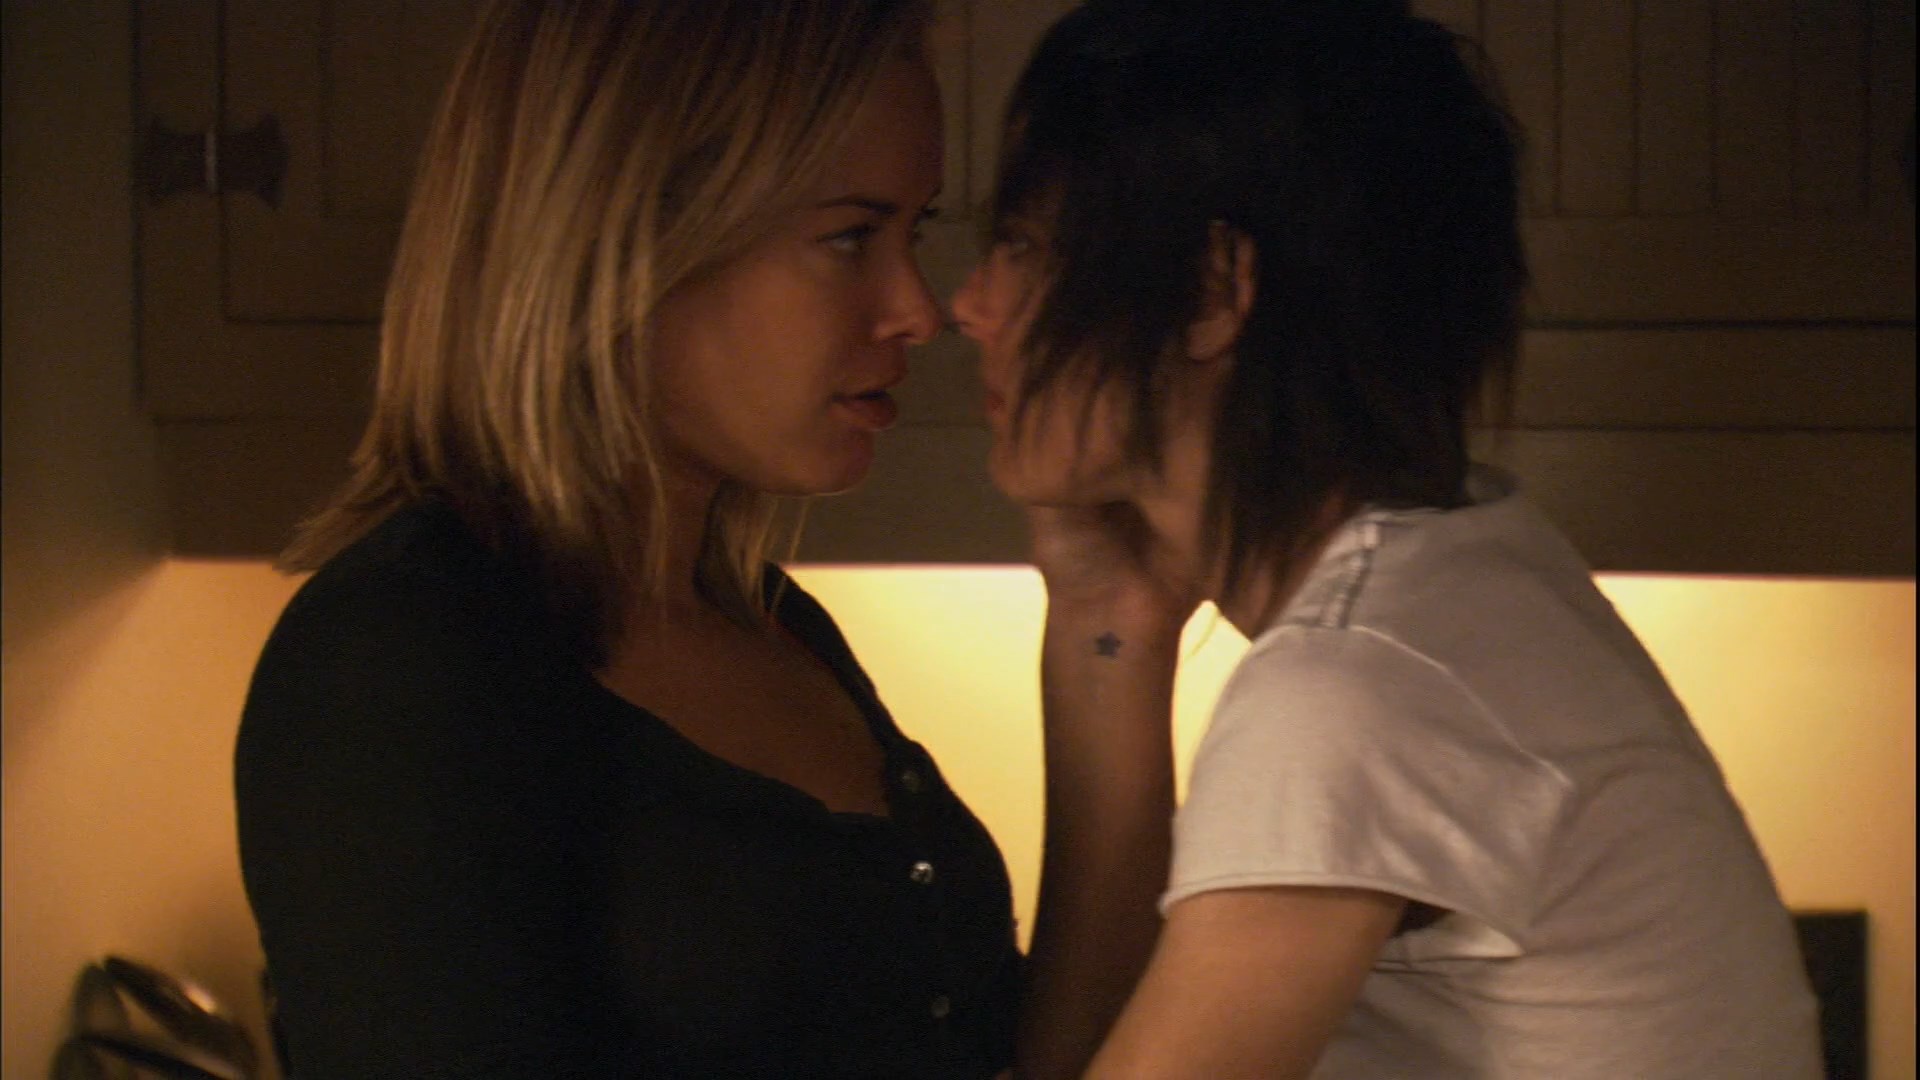 Ladies from The L Word S4 - 1080p (15 Clips/Names inside) .